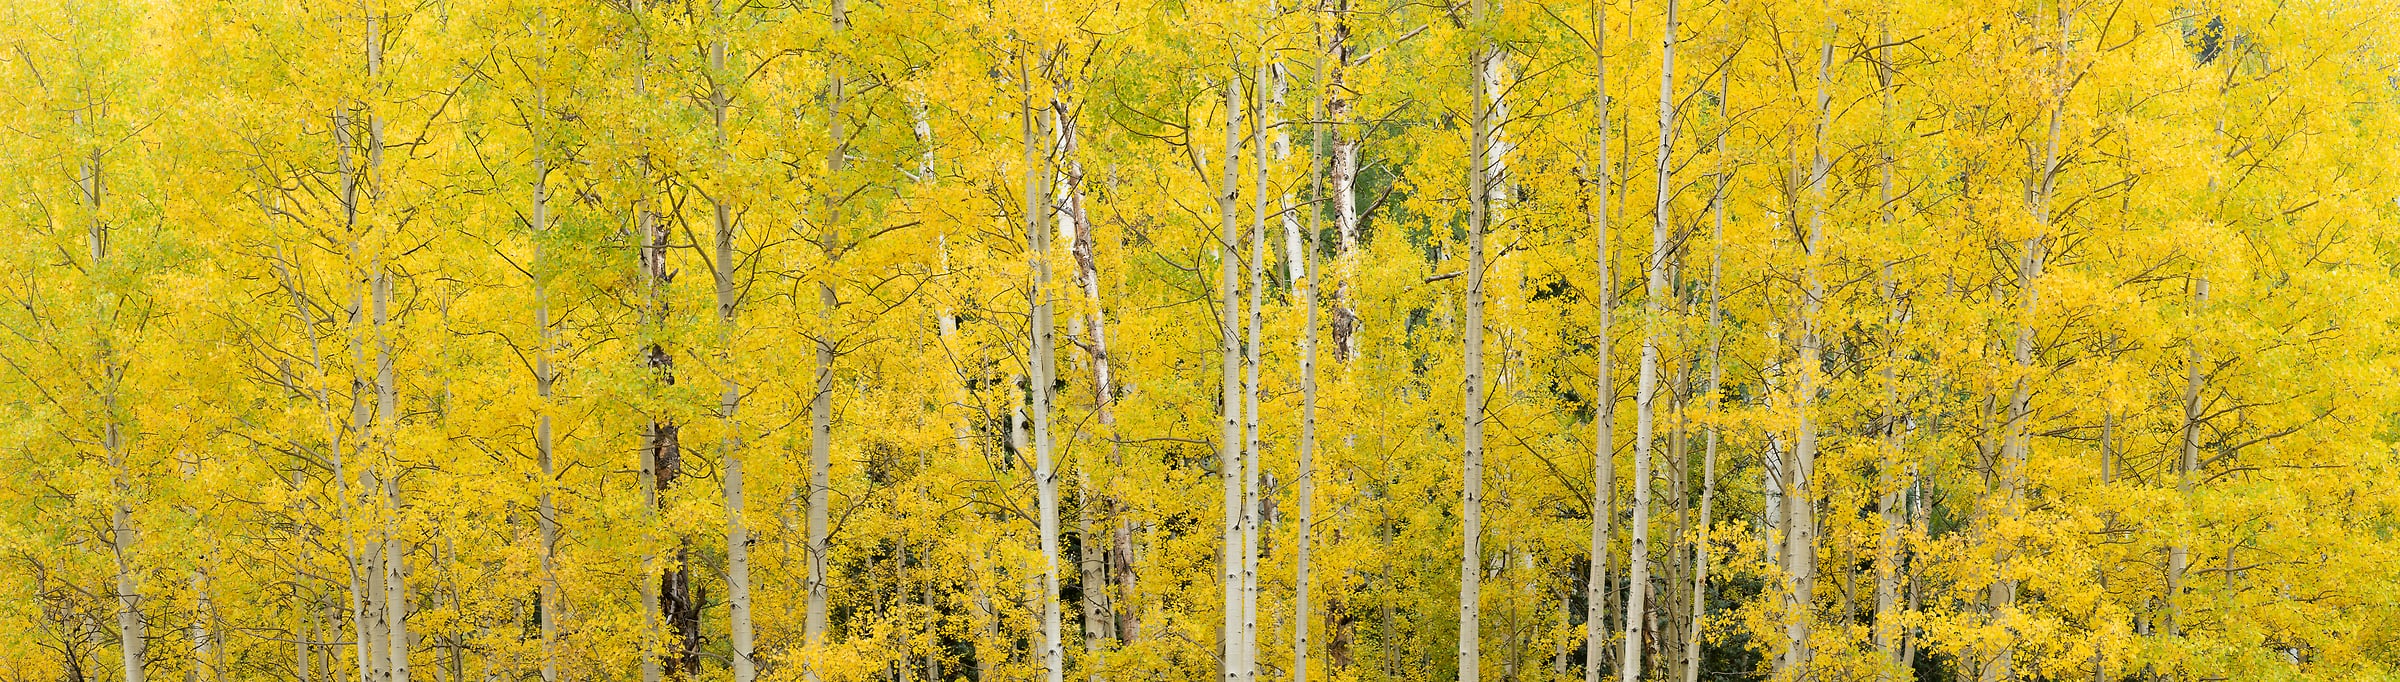 332 megapixels! A very high resolution, large-format VAST photo print of yellow aspen trees; photograph created by Greg Probst in San Juan National Forest, Colorado.